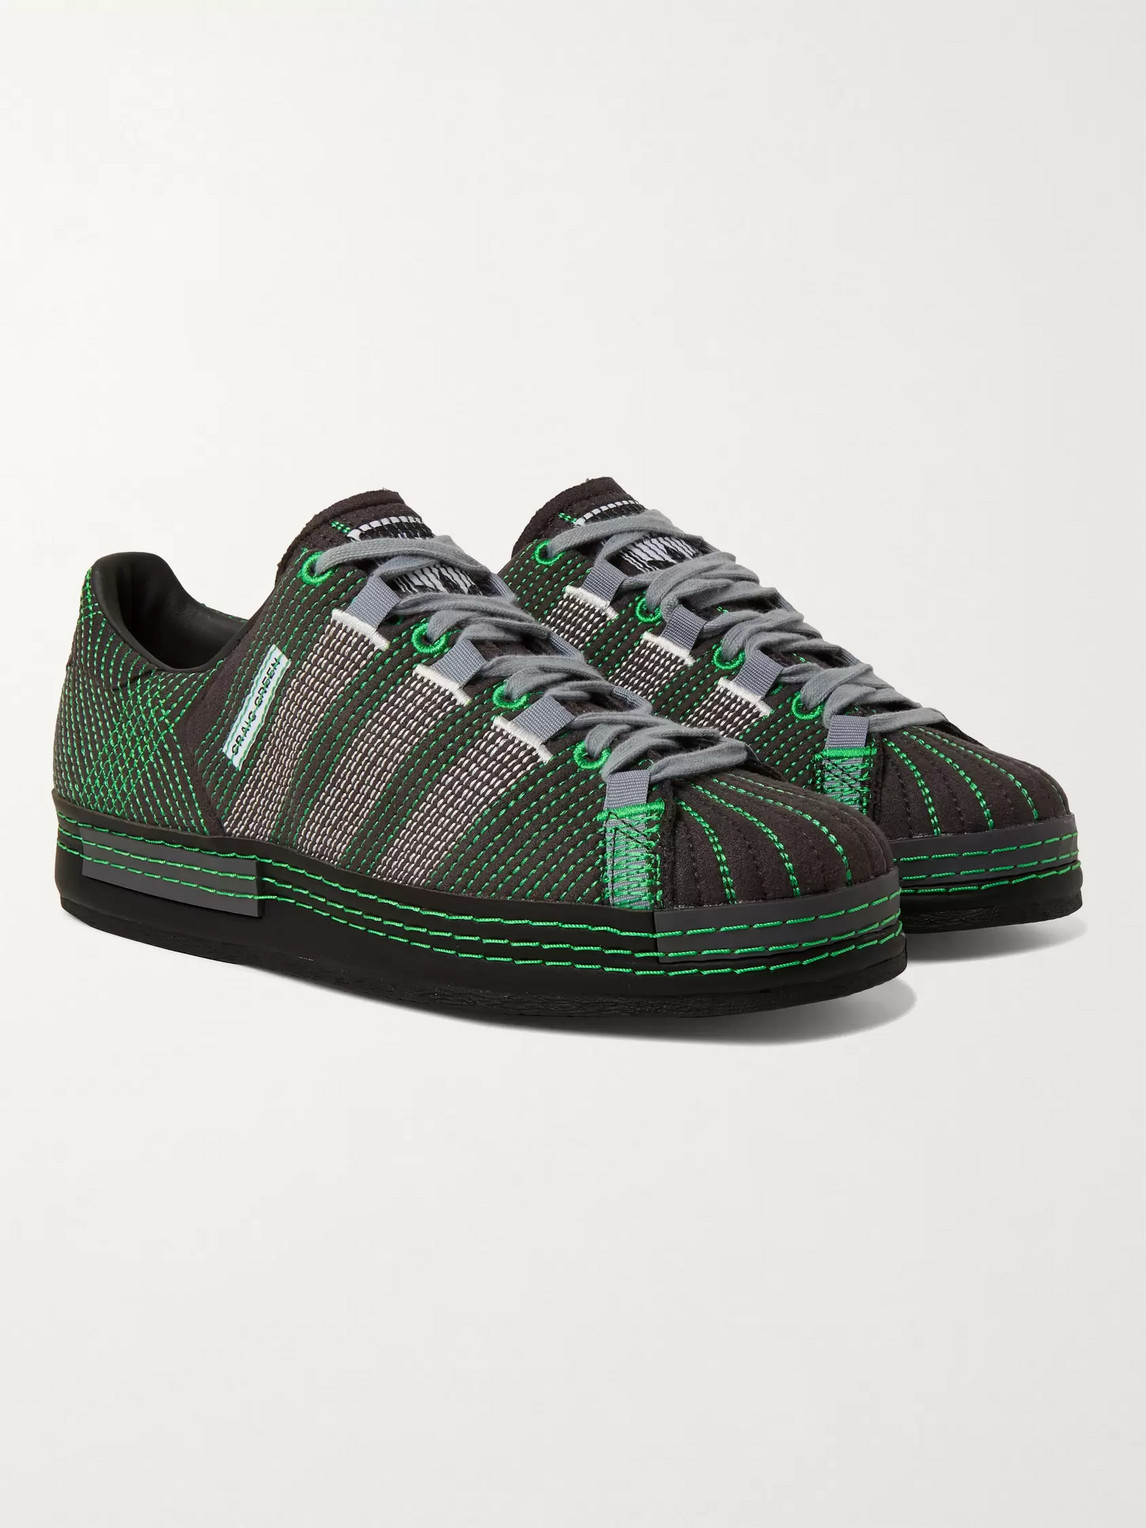 Adidas Consortium Craig Green Superstar Embroidered Faux Suede Trainers In Black